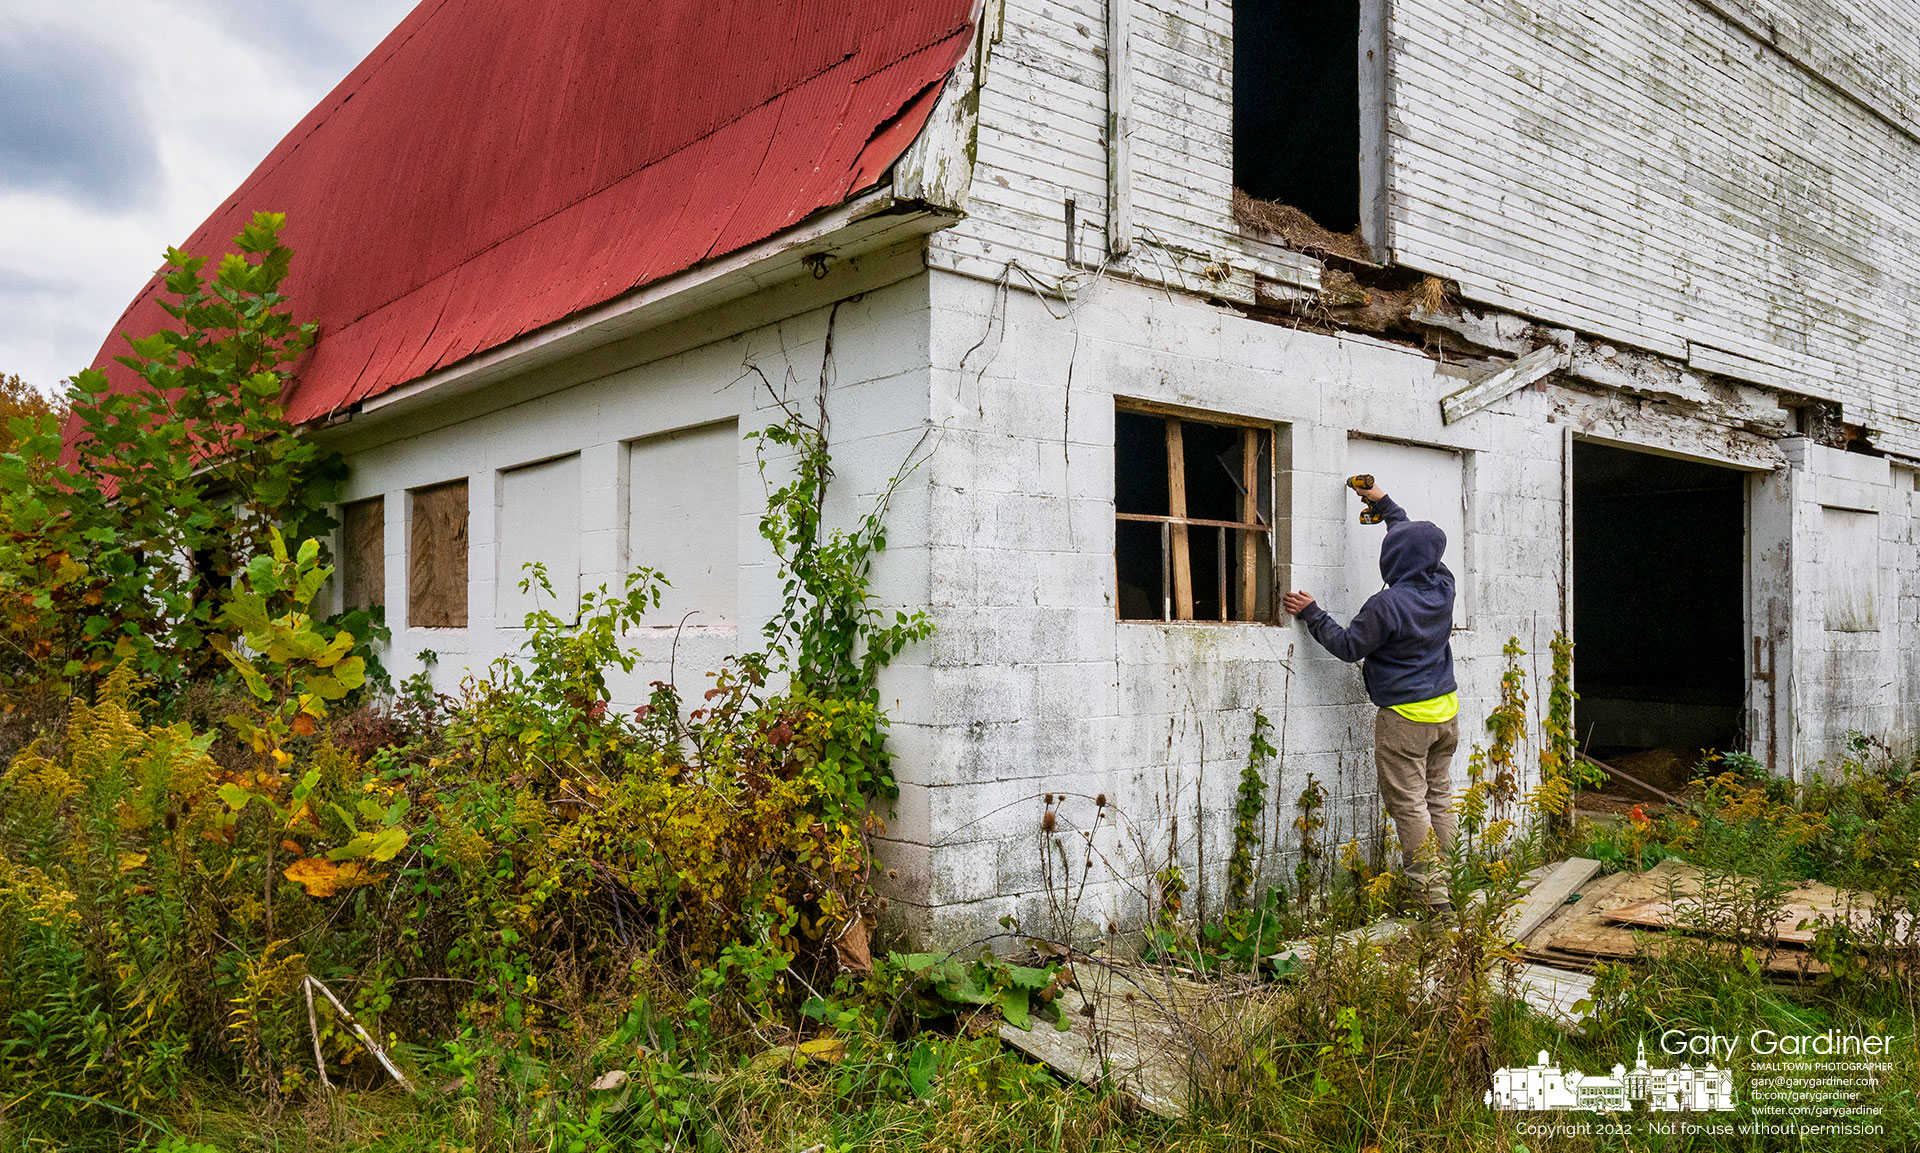 A worker removes plywood covering windows at the barn on the Braun Farm in preparation for removing lead paint and asbestos from the barn and abandoned farmhouse as both are prepared for demolition. My Final Photo for October 18, 2022.